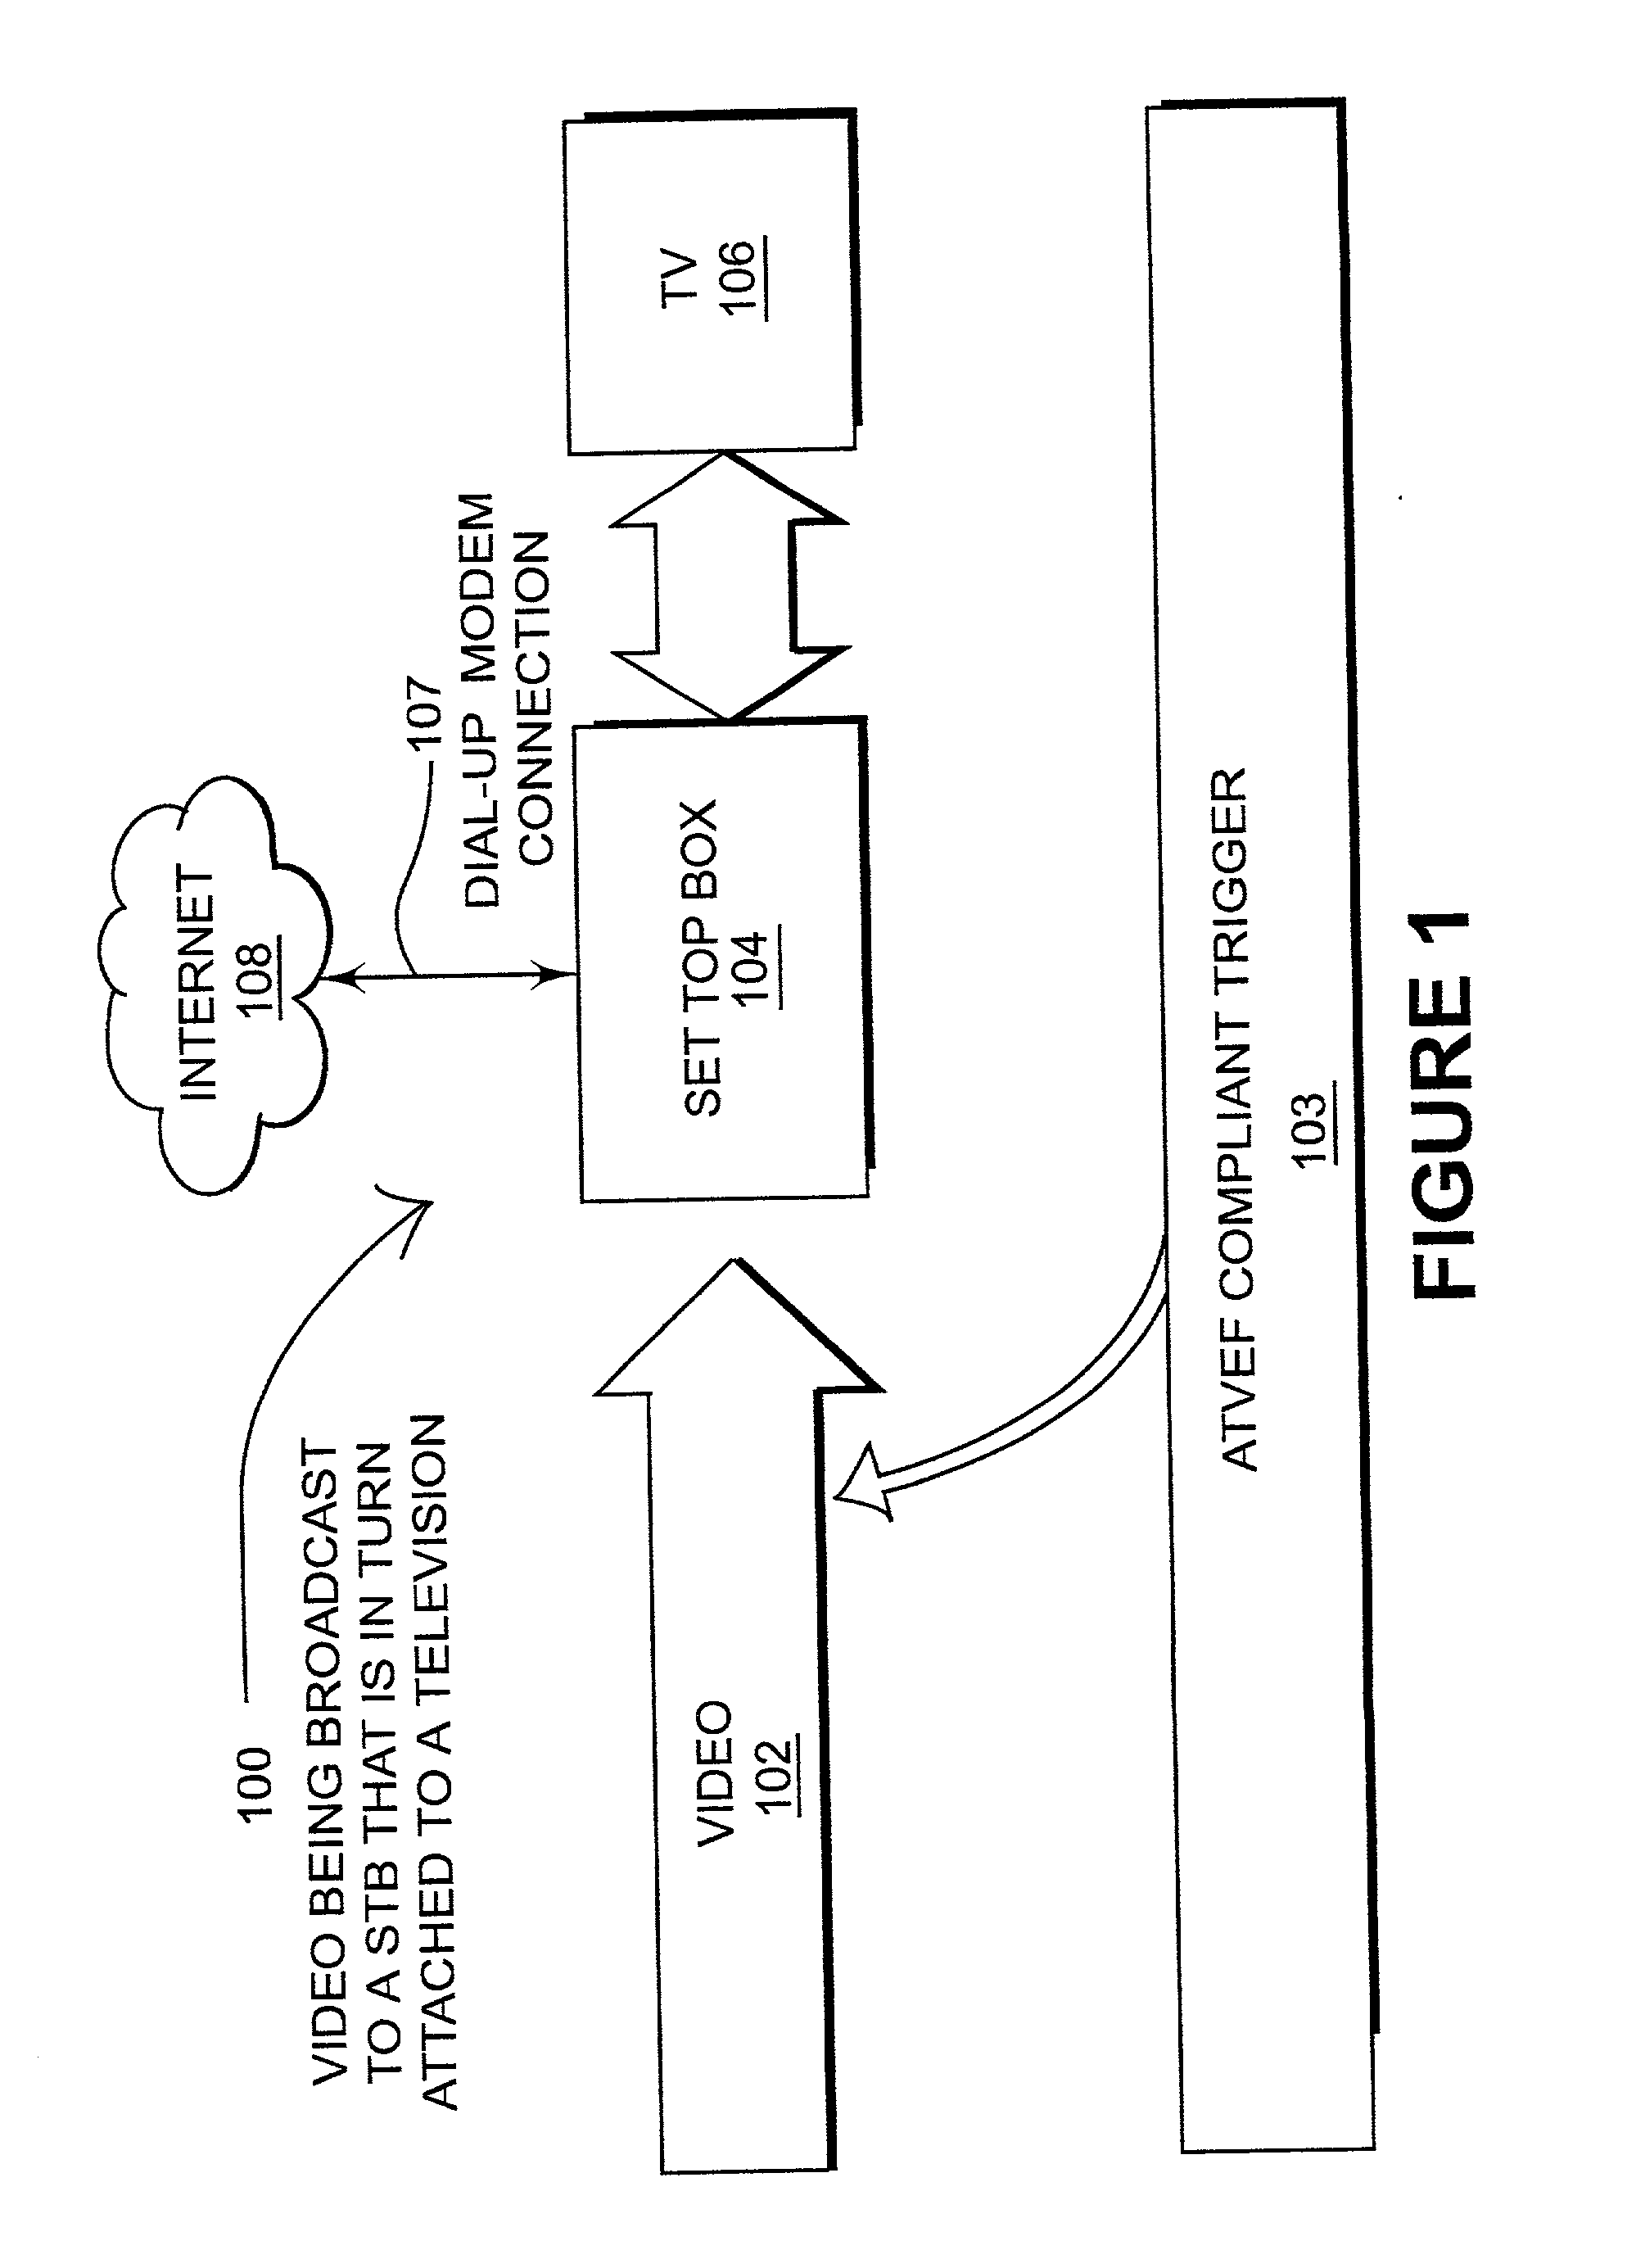 Detection and recognition of data receiver to facilitate proper transmission of enhanced data